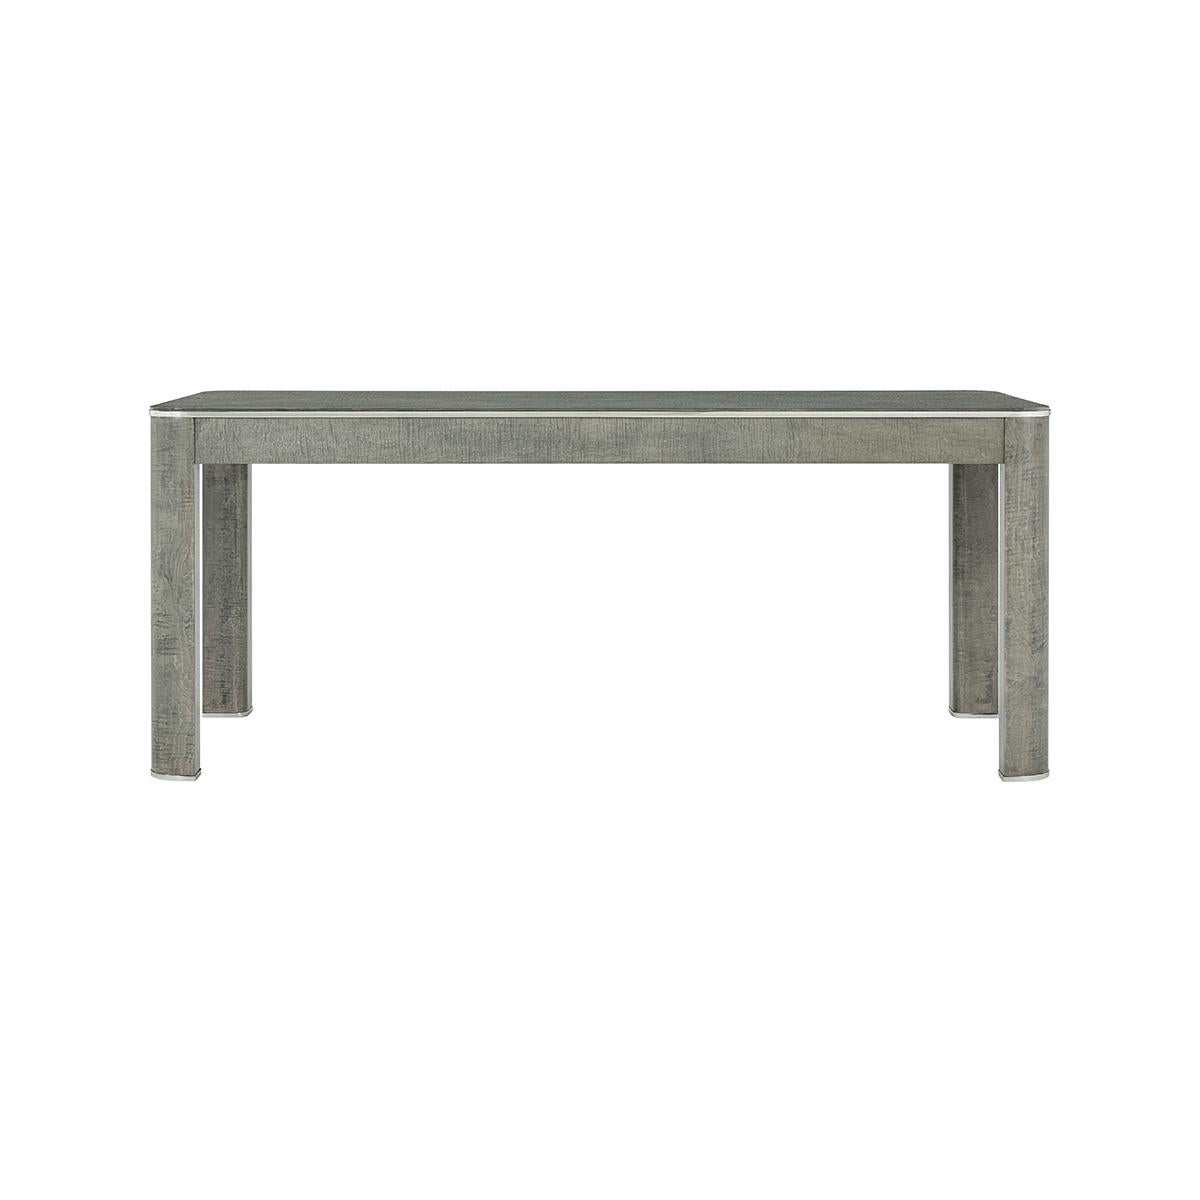 A welcoming and sophisticated work surface, A three-drawer writing table that warmly blends brushed stainless steel accents with maple veneer and layered oak.

Dimensions: 72